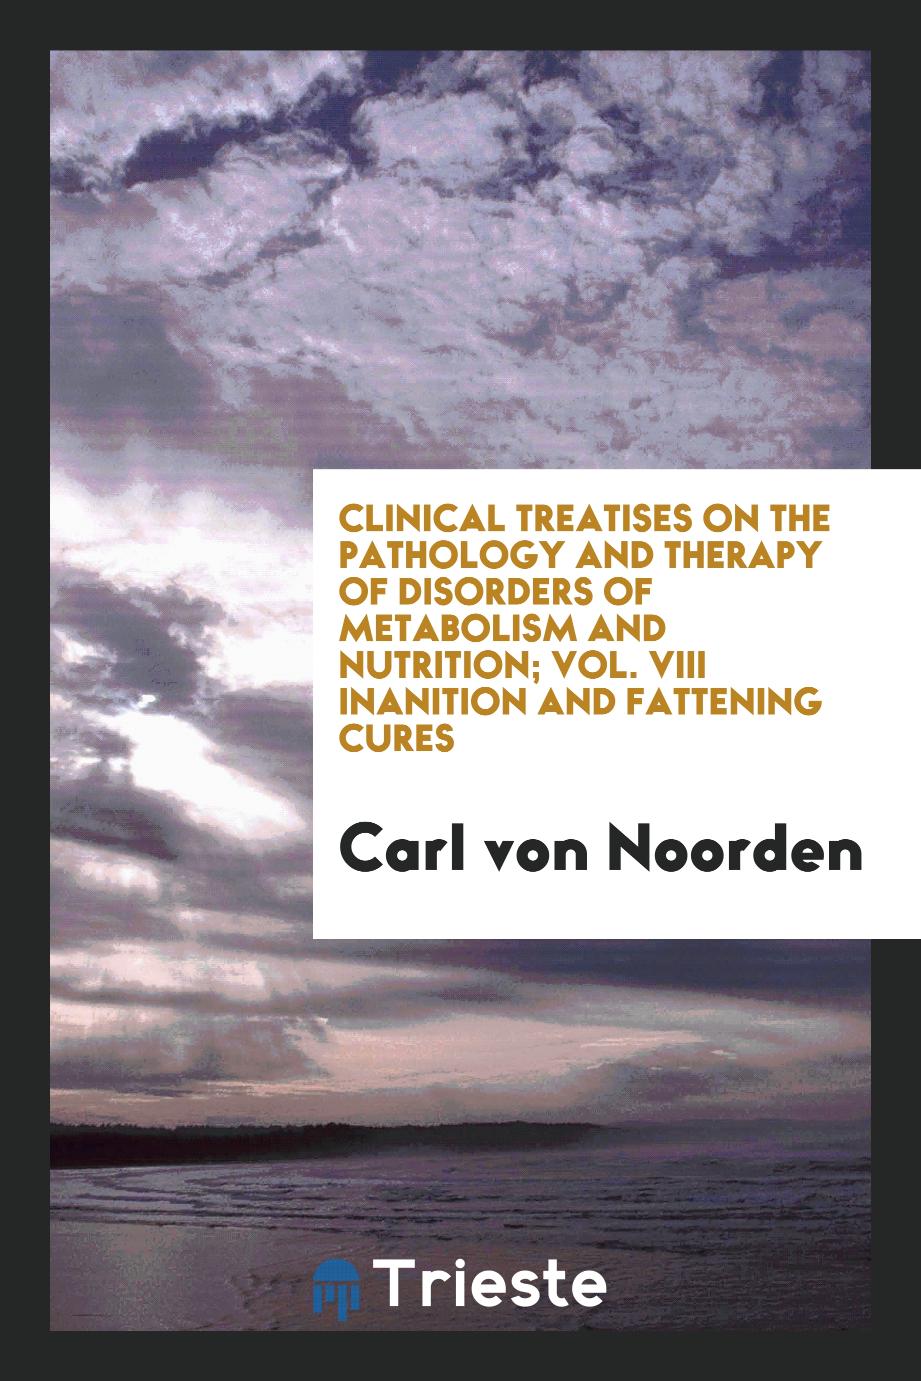 Clinical Treatises on the Pathology and Therapy of Disorders of Metabolism and Nutrition; Vol. VIII Inanition and Fattening Cures